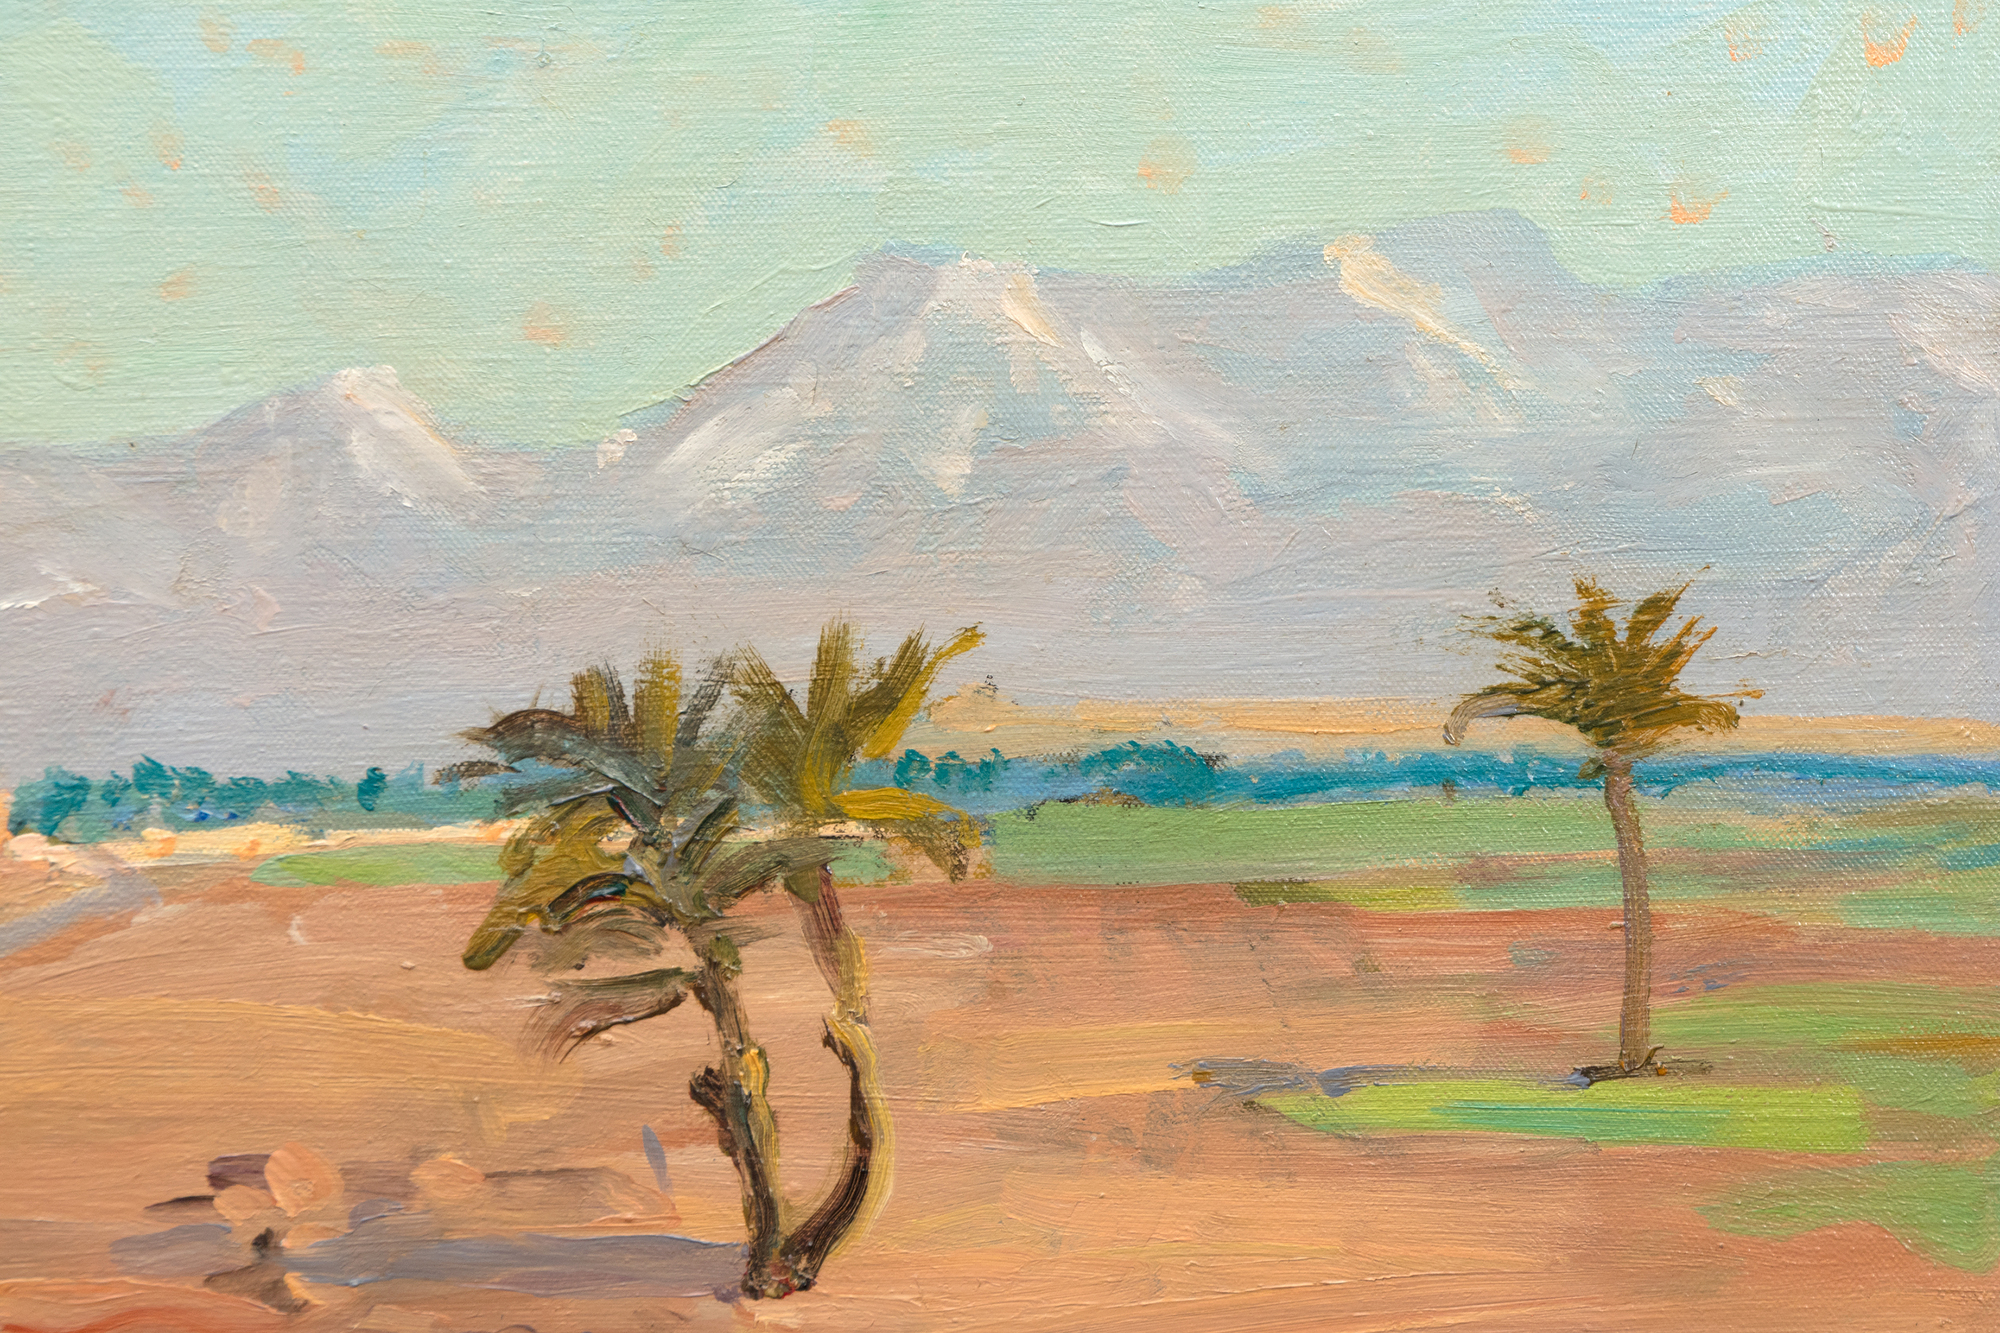 An outstanding example of Churchill’s North African scenes, one in which he deftly captures the scenery and light that his artistic mentor, John Lavery, had told him about in the mid 1930s.  Another artist mentor, Walter Sickert, taught Churchill how to project photo images directly on to a canvas as an aid in painting, a technique used to advantage in this instance.  The Studio Archives at Chartwell include 5 photographs, one of the camel and four others, that Churchill used as aids.
<br>
<br>With the visual aids, Churchill could focus on the vibrant colors, the tan of the sand and buildings contrasting with the brilliant blue skies, splashes of green adding energy to the painting. A different Marrakech scene, “Tower of the Koutoubia Mosque”, set an auction record for Churchill when it sold in 2021 for $11 million USD.